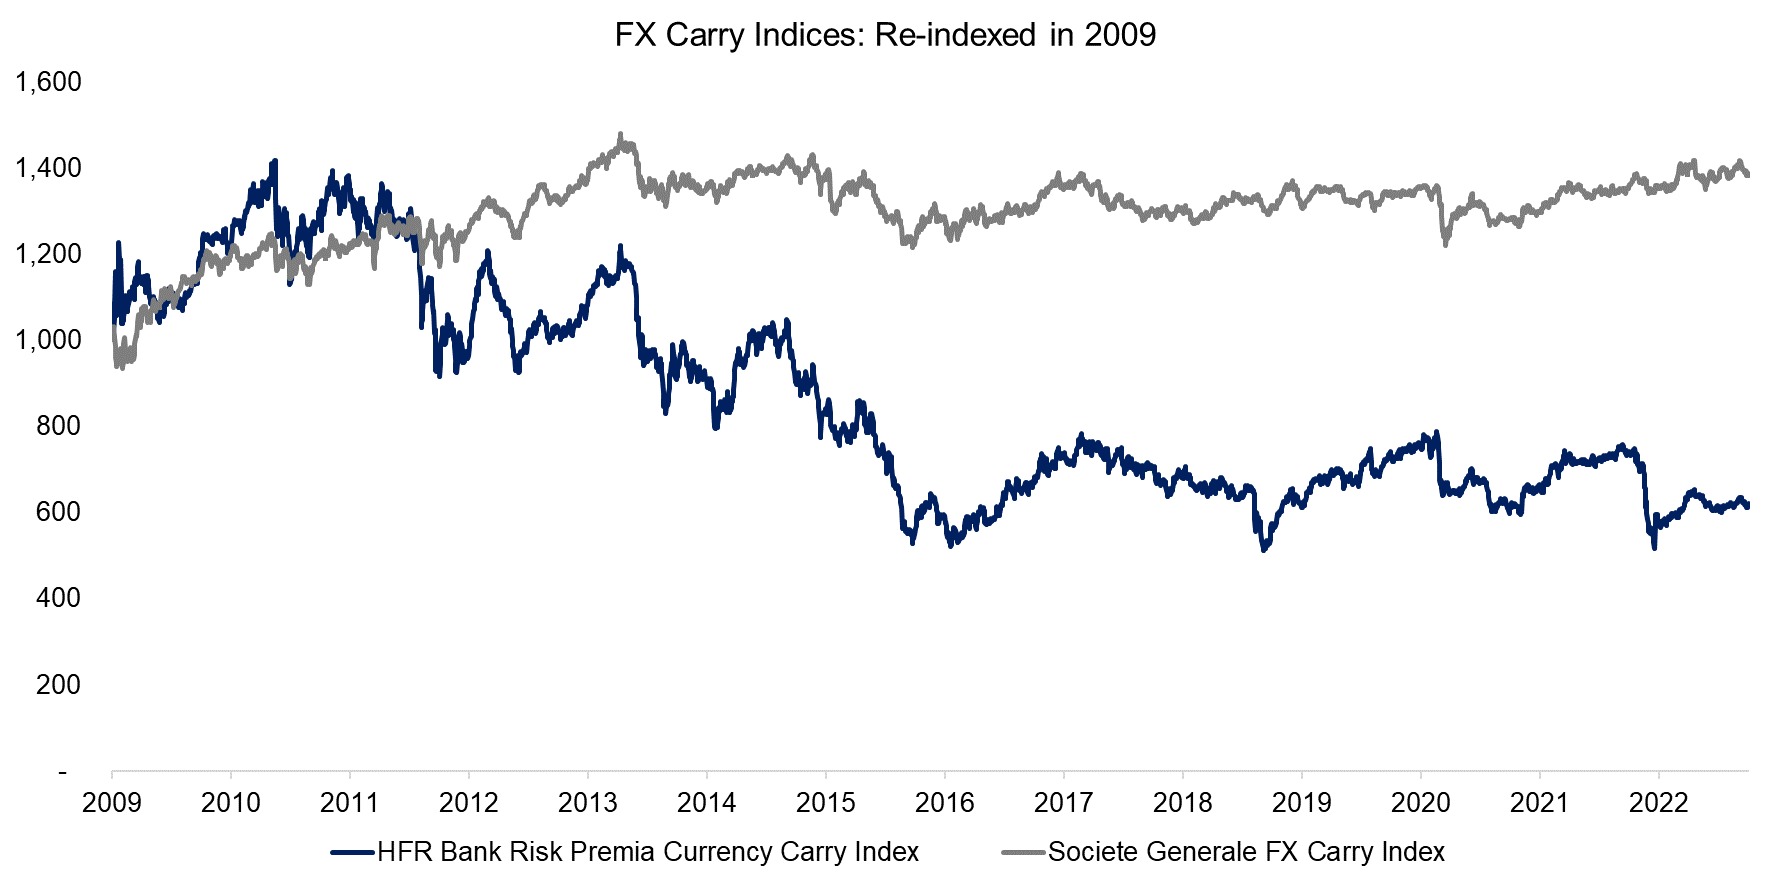 FX Carry Indices Re-indexed in 2009